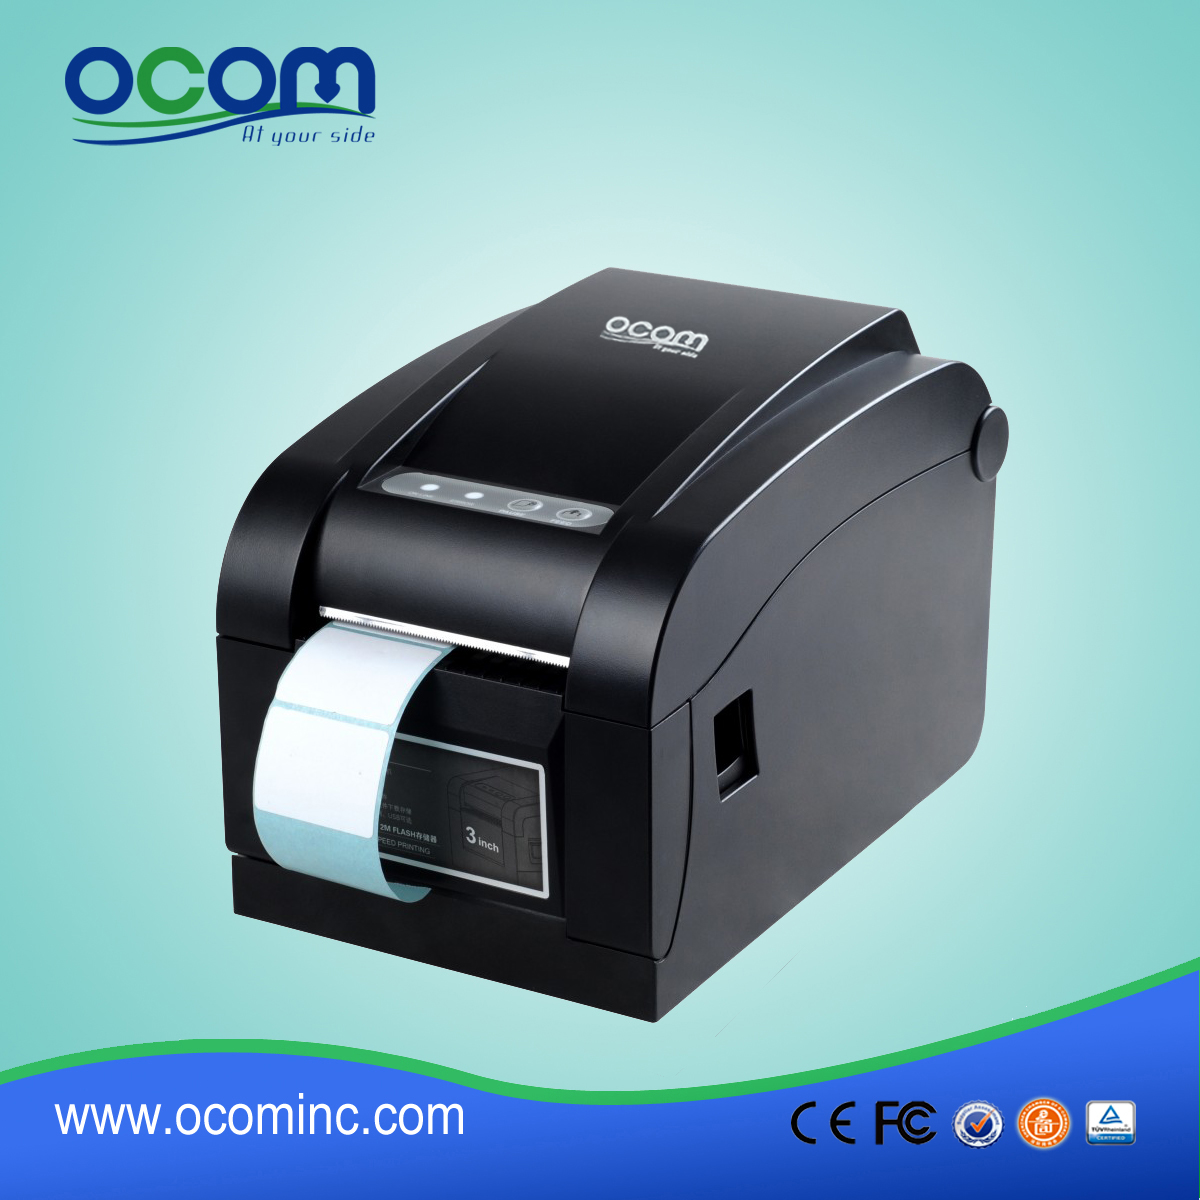 High Speed Label Printer Compatible with ESC/POS Print Commands Set